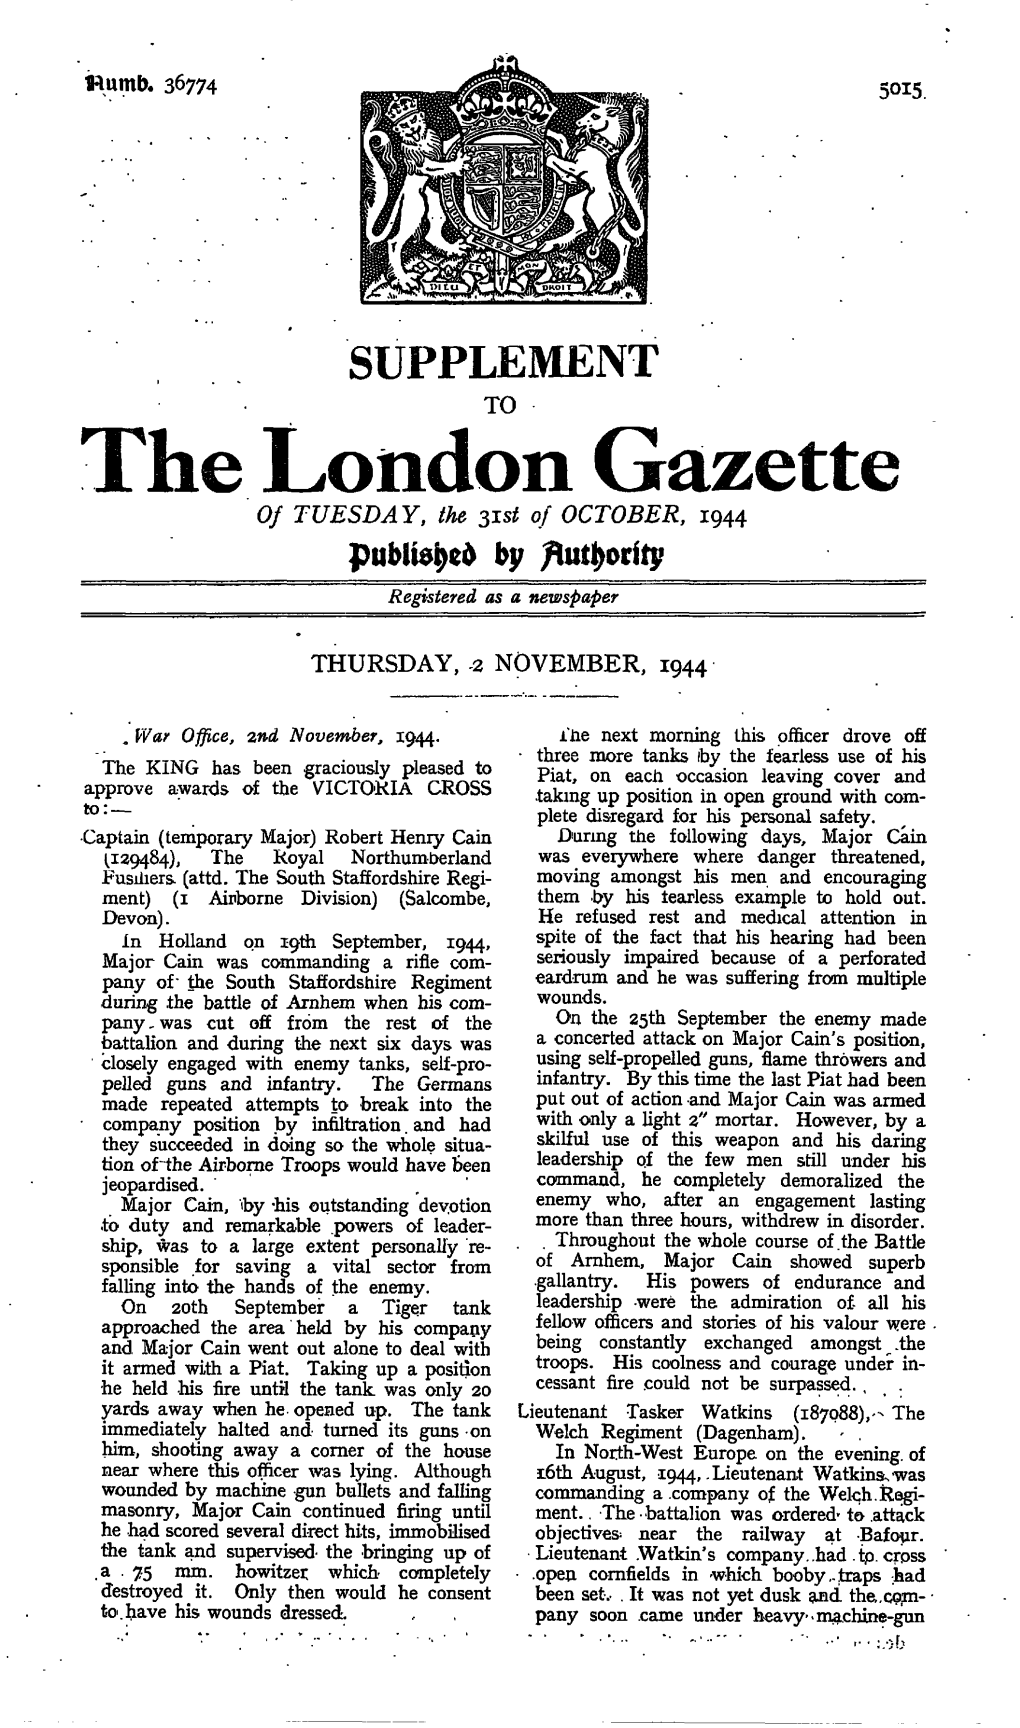 The London Gazette of TUESDAY, the 315* of OCTOBER, 1944 by Registered As a Newspaper